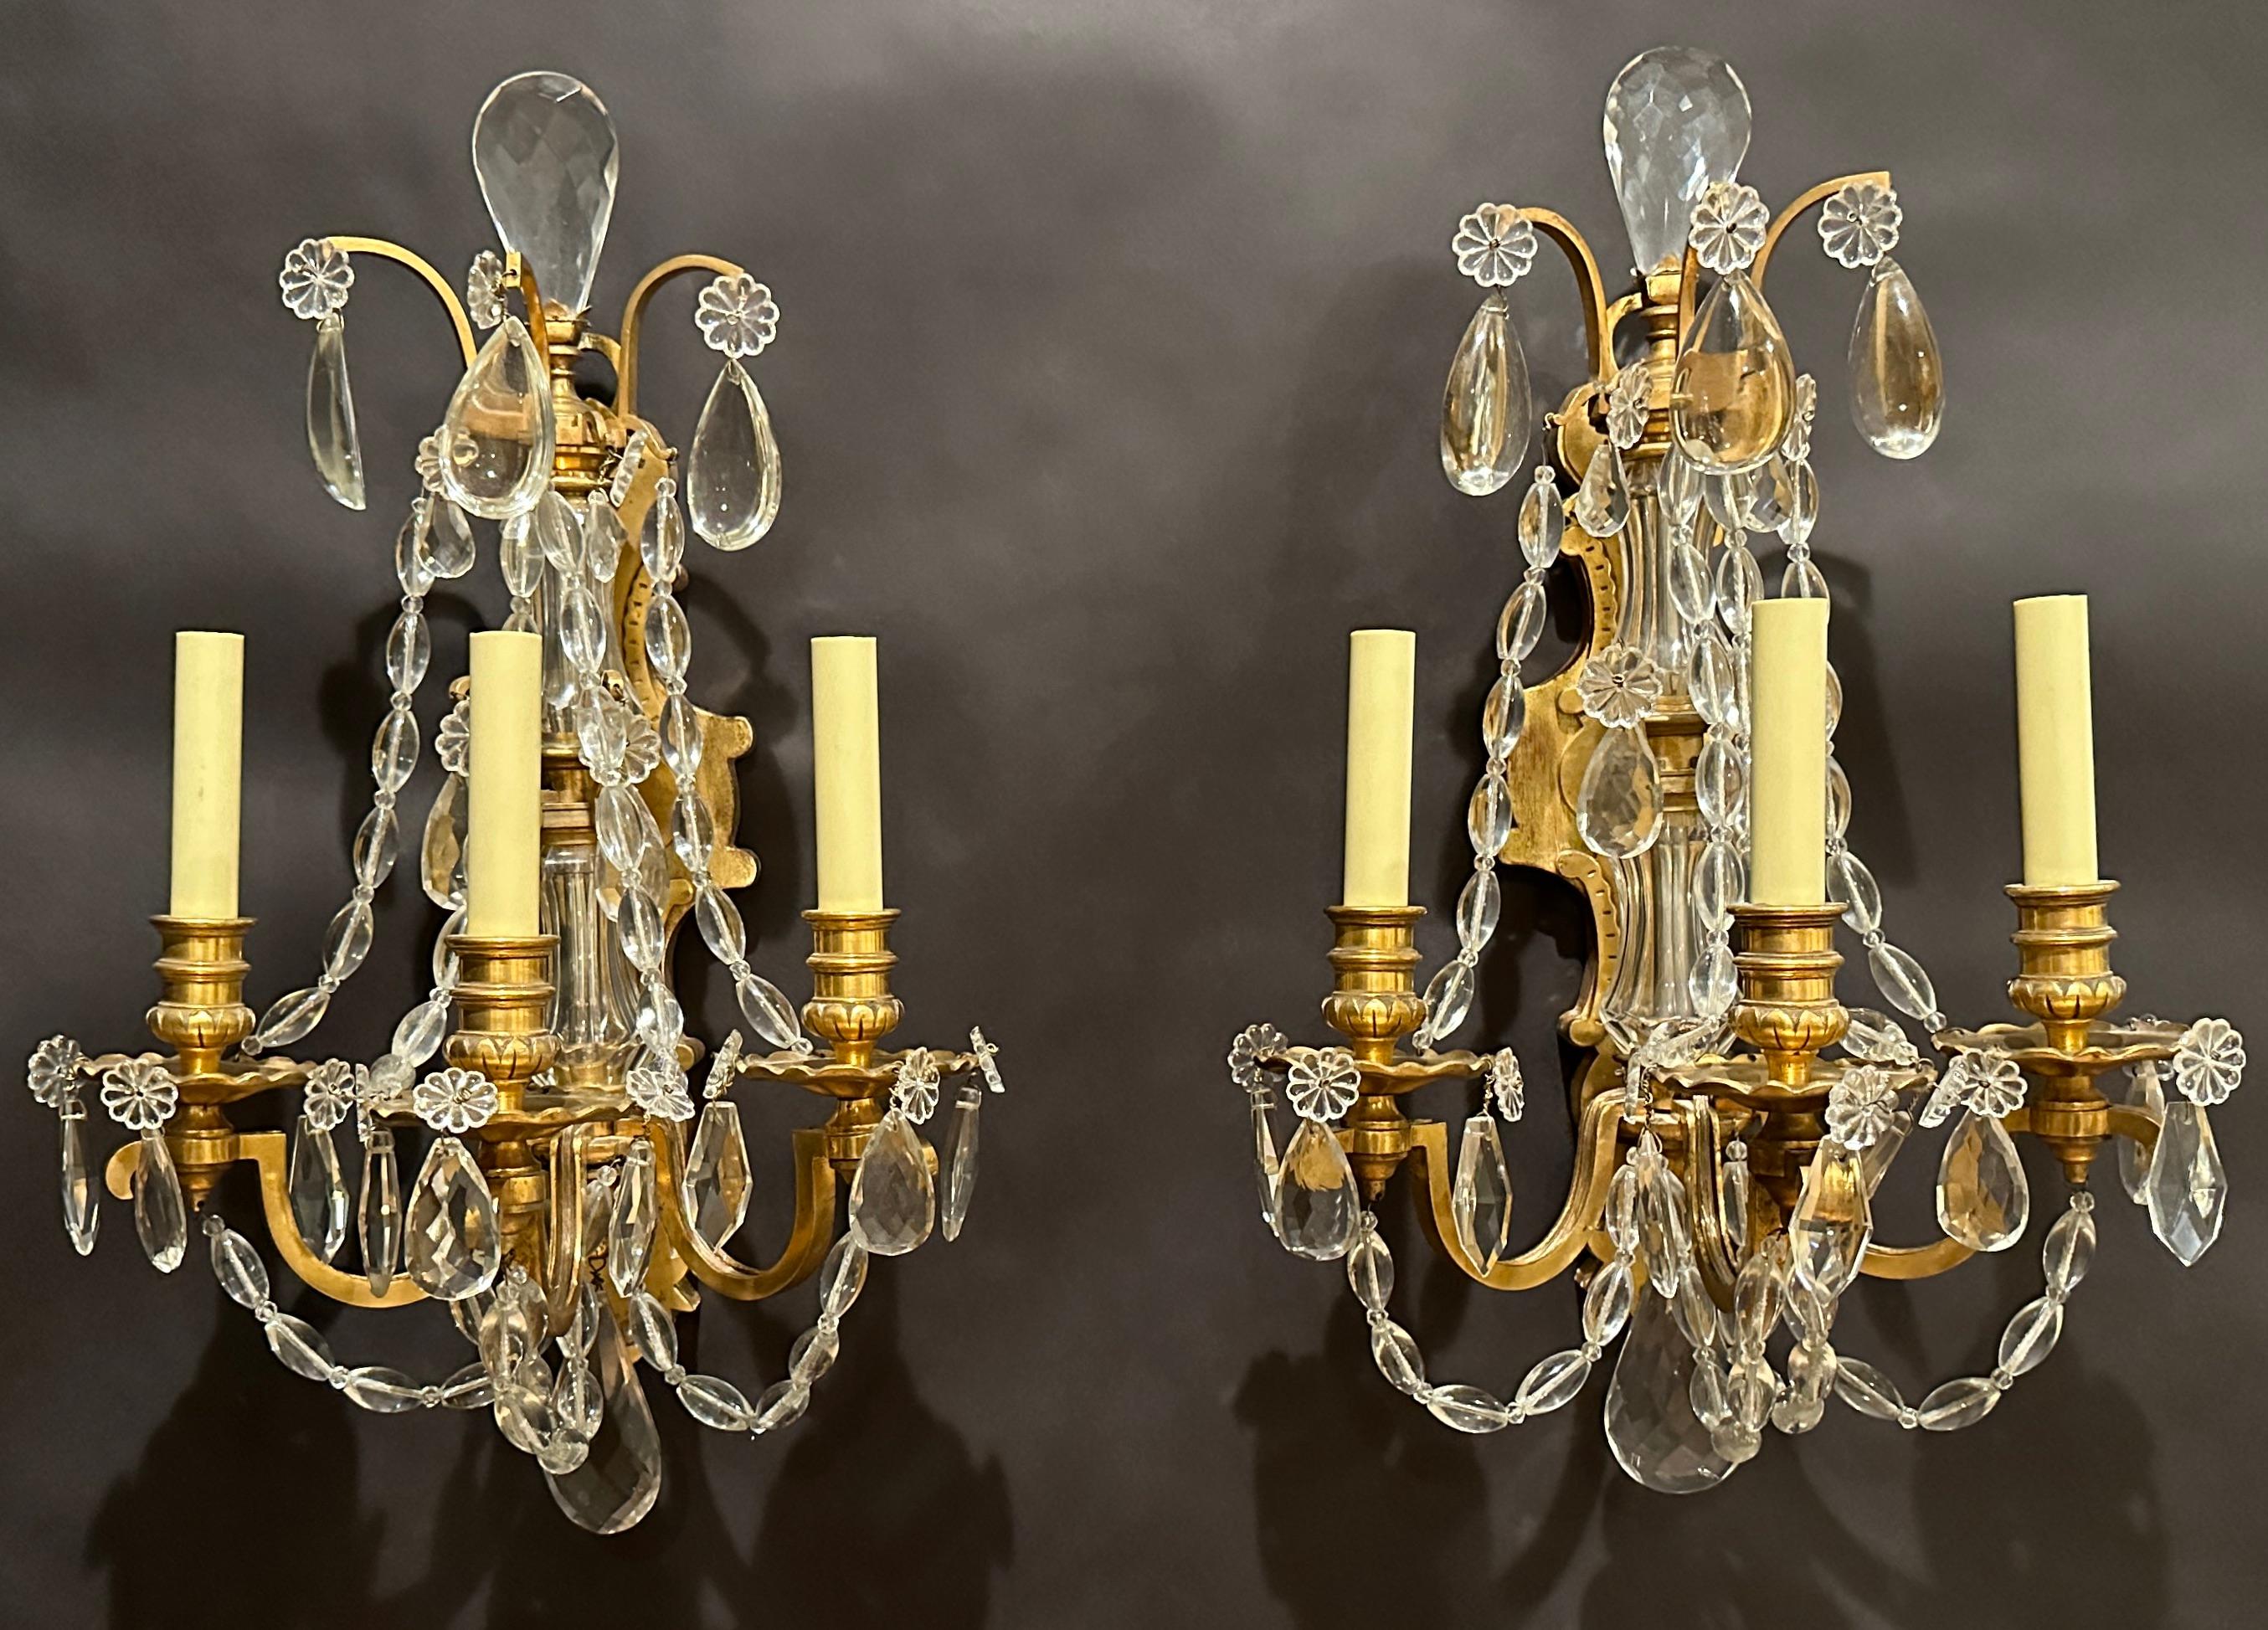 Gilt bronze and crystal Versilles style Circa 1900 Louis XVI wall appliqués. Fine quality with unusual crystal pain oval crystal chain garland elegantly draped over gilt bronze flat square arms.